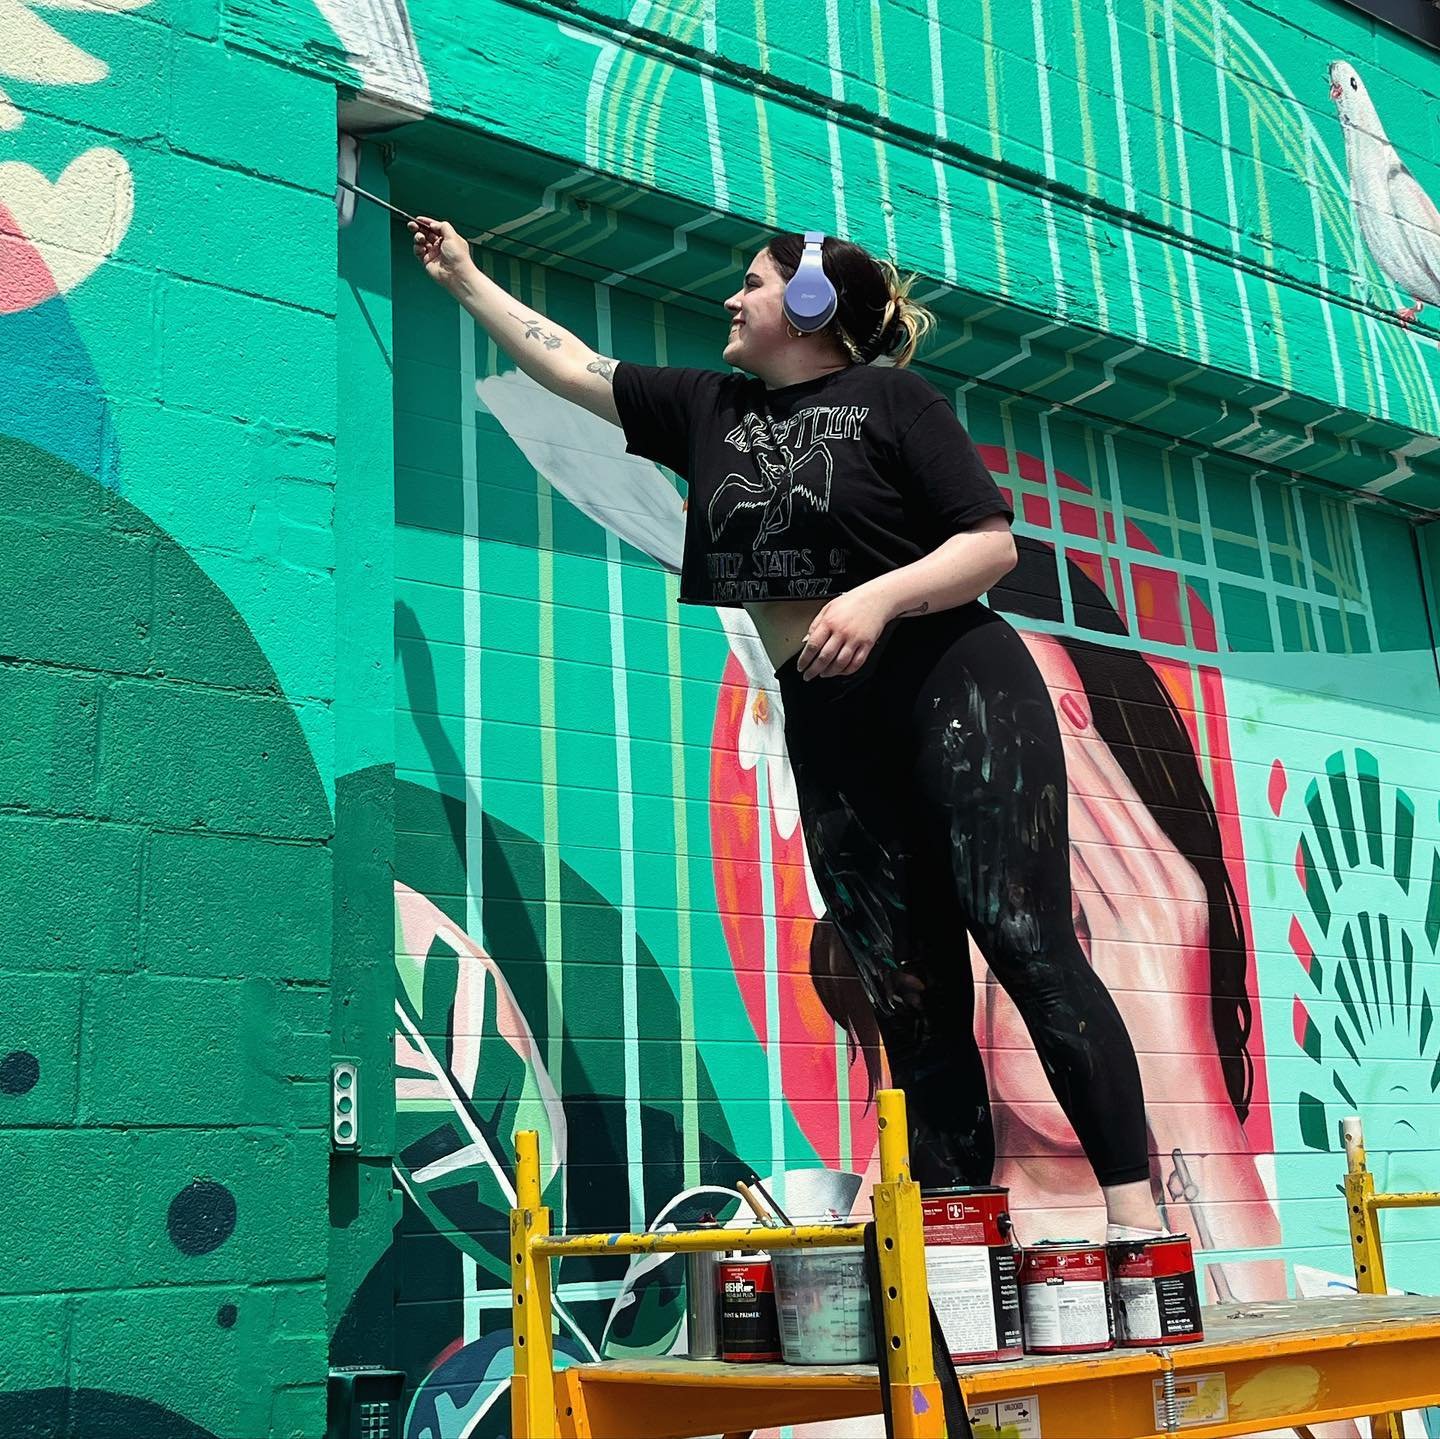 This post is your super important reminder that Alley Islands is this Saturday from 12-10pm! If you&rsquo;re not there I will b so sad and cry. At risk of accidentally exposing the finished product of my mural here are some action shots 🥊💥 
.
.
.

